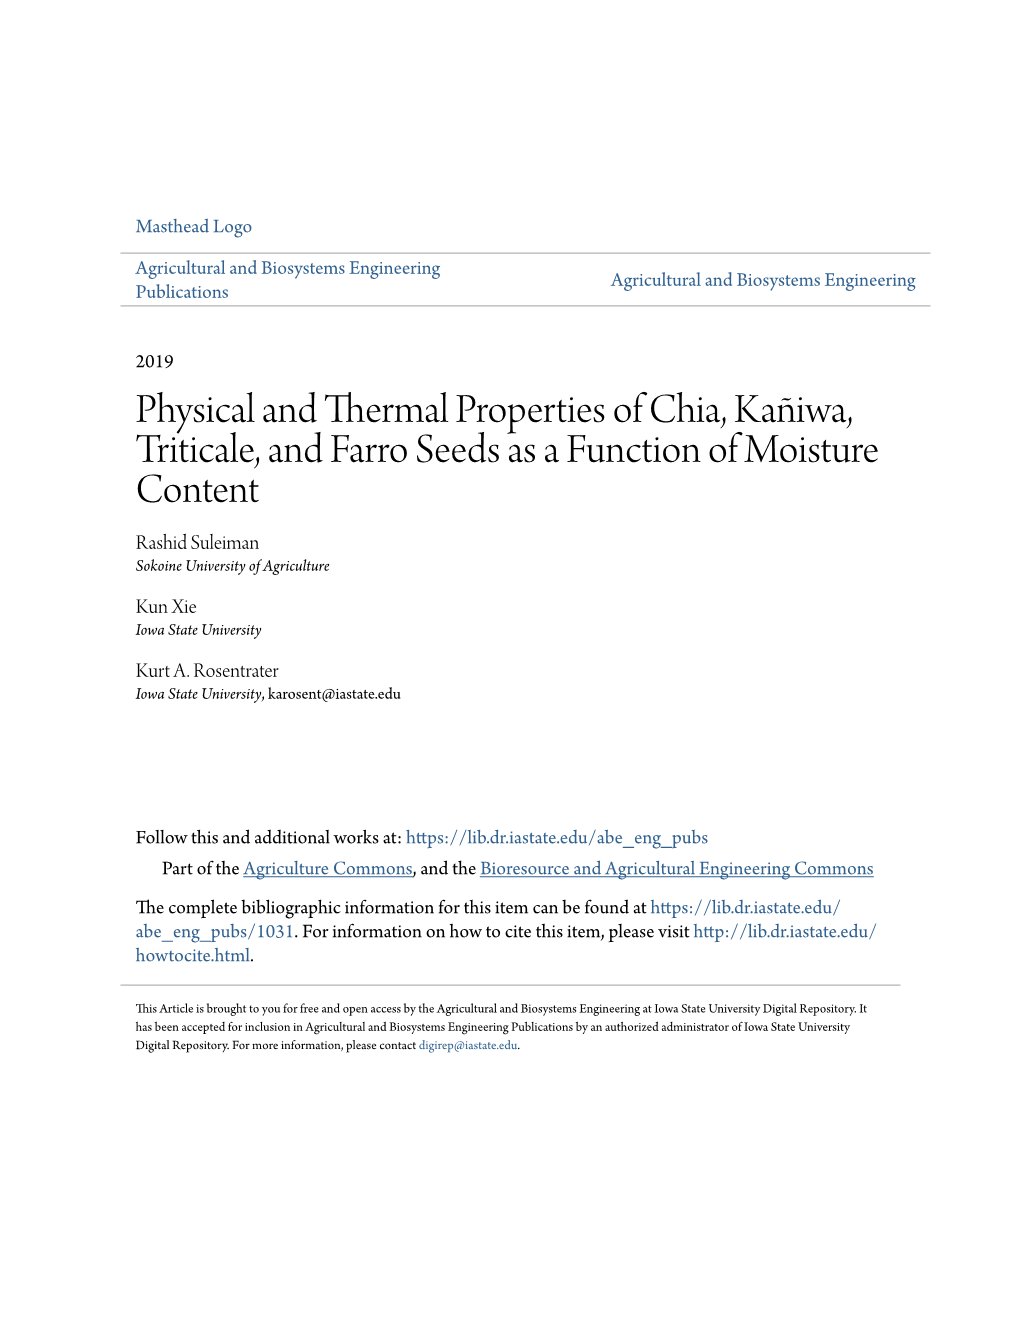 Physical and Thermal Properties of Chia, Kañiwa, Triticale, and Farro Seeds As a Function of Moisture Content Rashid Suleiman Sokoine University of Agriculture